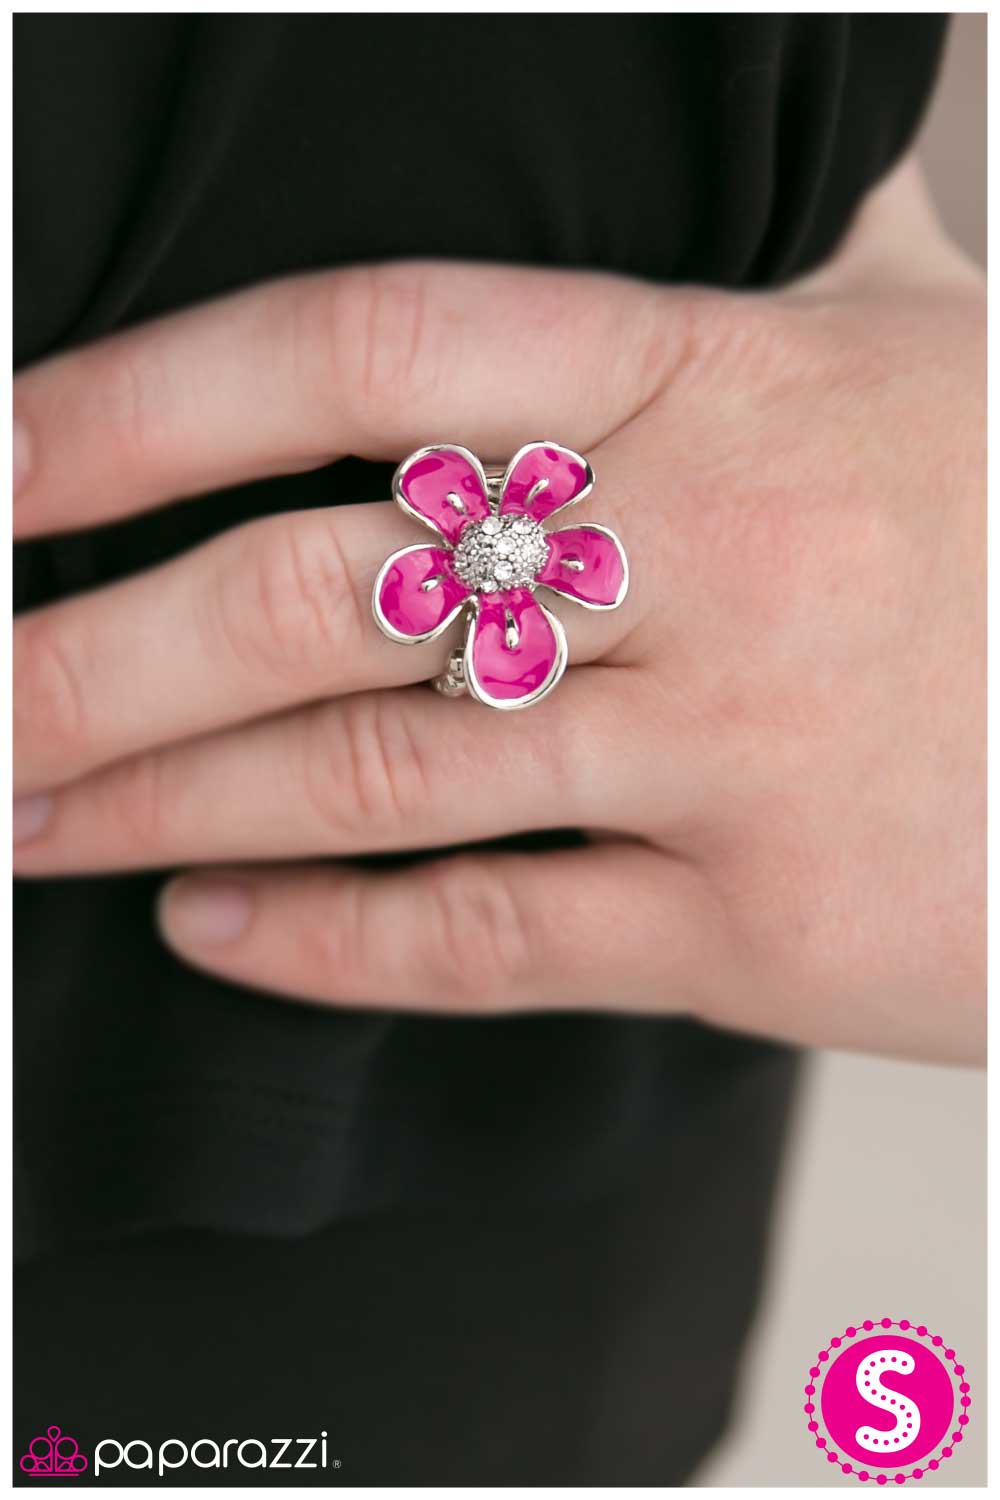 It Must Be Spring - Pink - Paparazzi ring